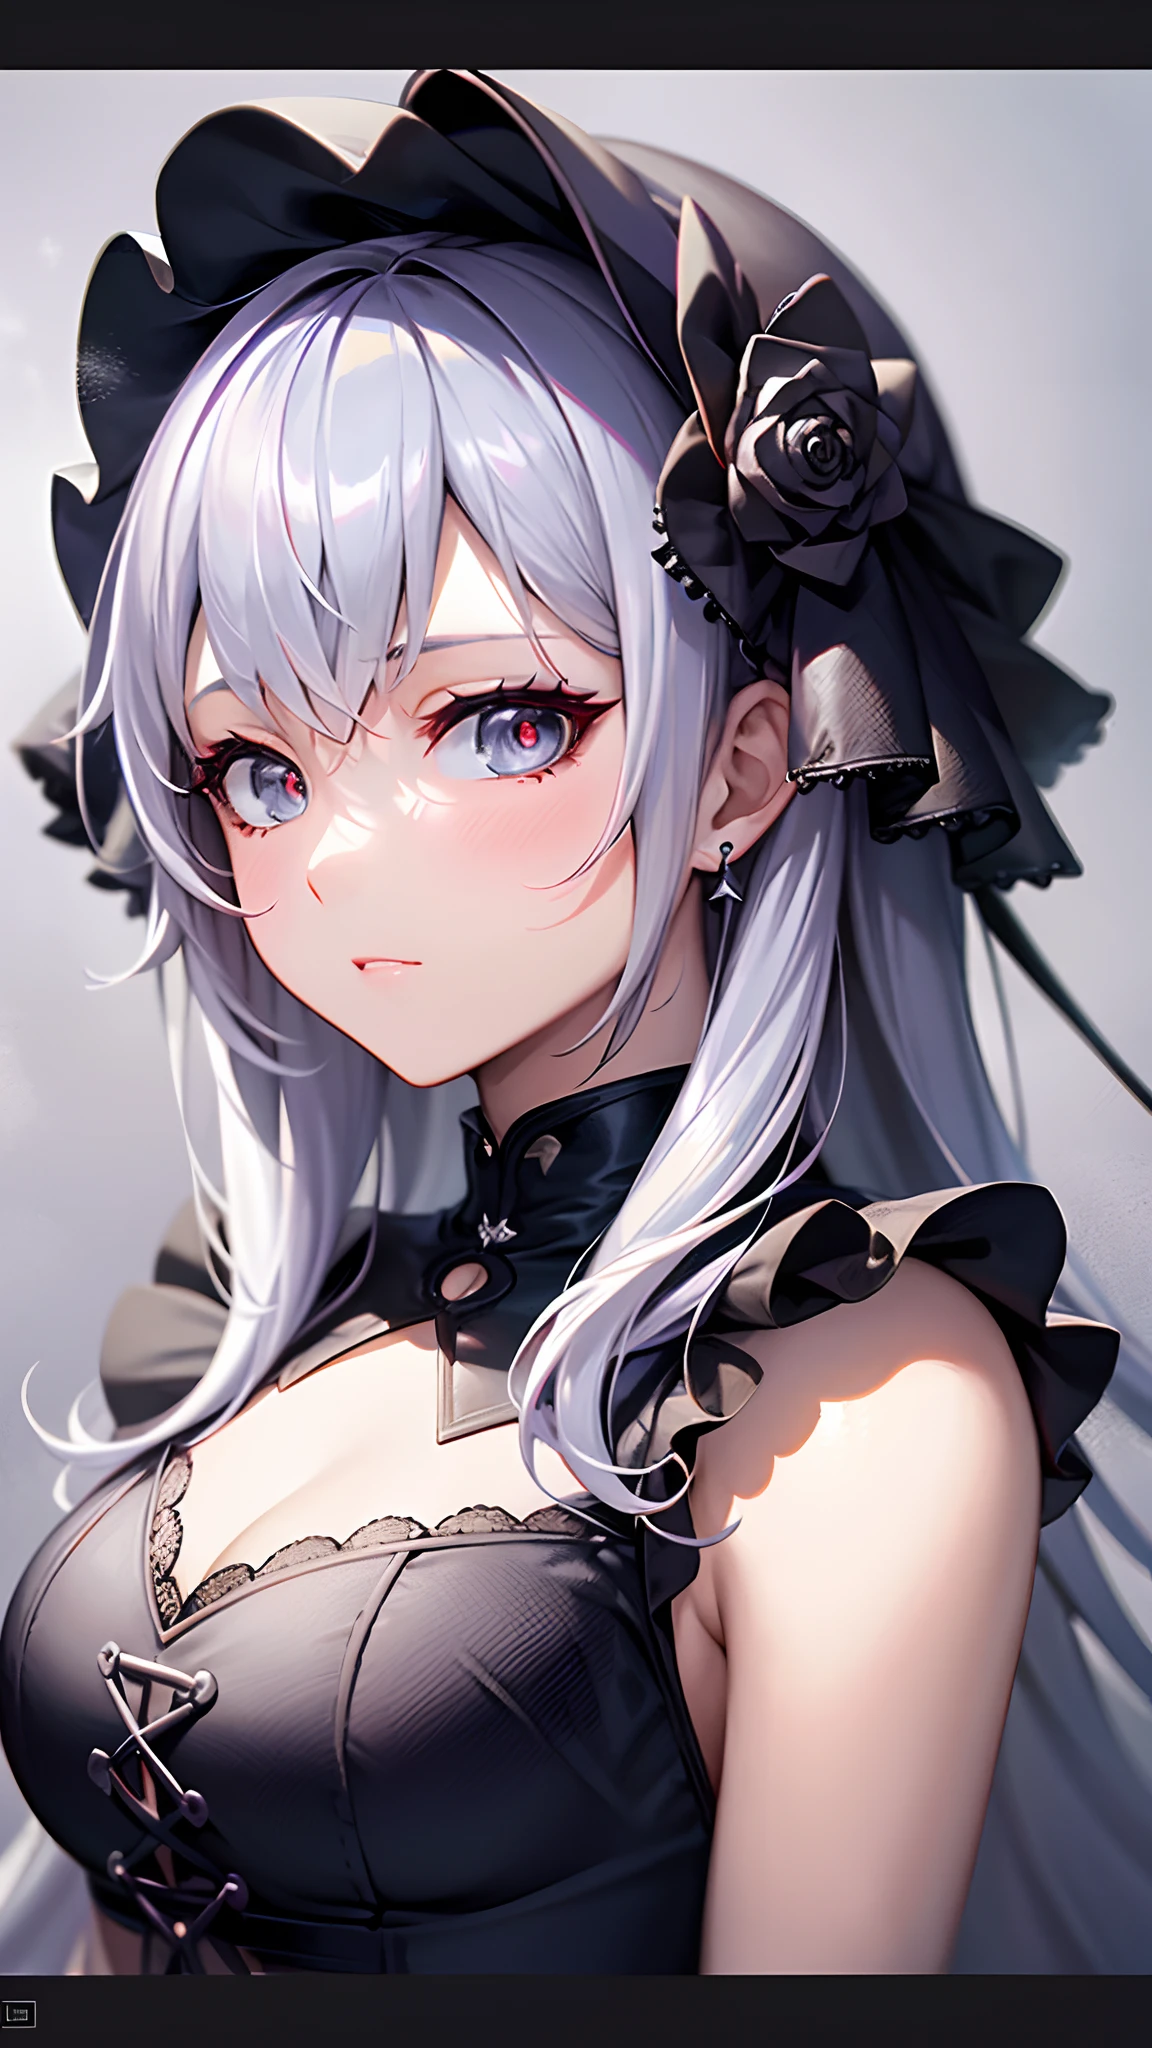 a close up of a woman in a dress with a white and black dress, gothic maiden anime girl, anime girl wearing a black dress, cute anime waifu in a nice dress, anime girl in a maid costume, an elegant gothic princess, guweiz, guweiz on pixiv artstation, guweiz on artstation pixiv, beautiful anime girl